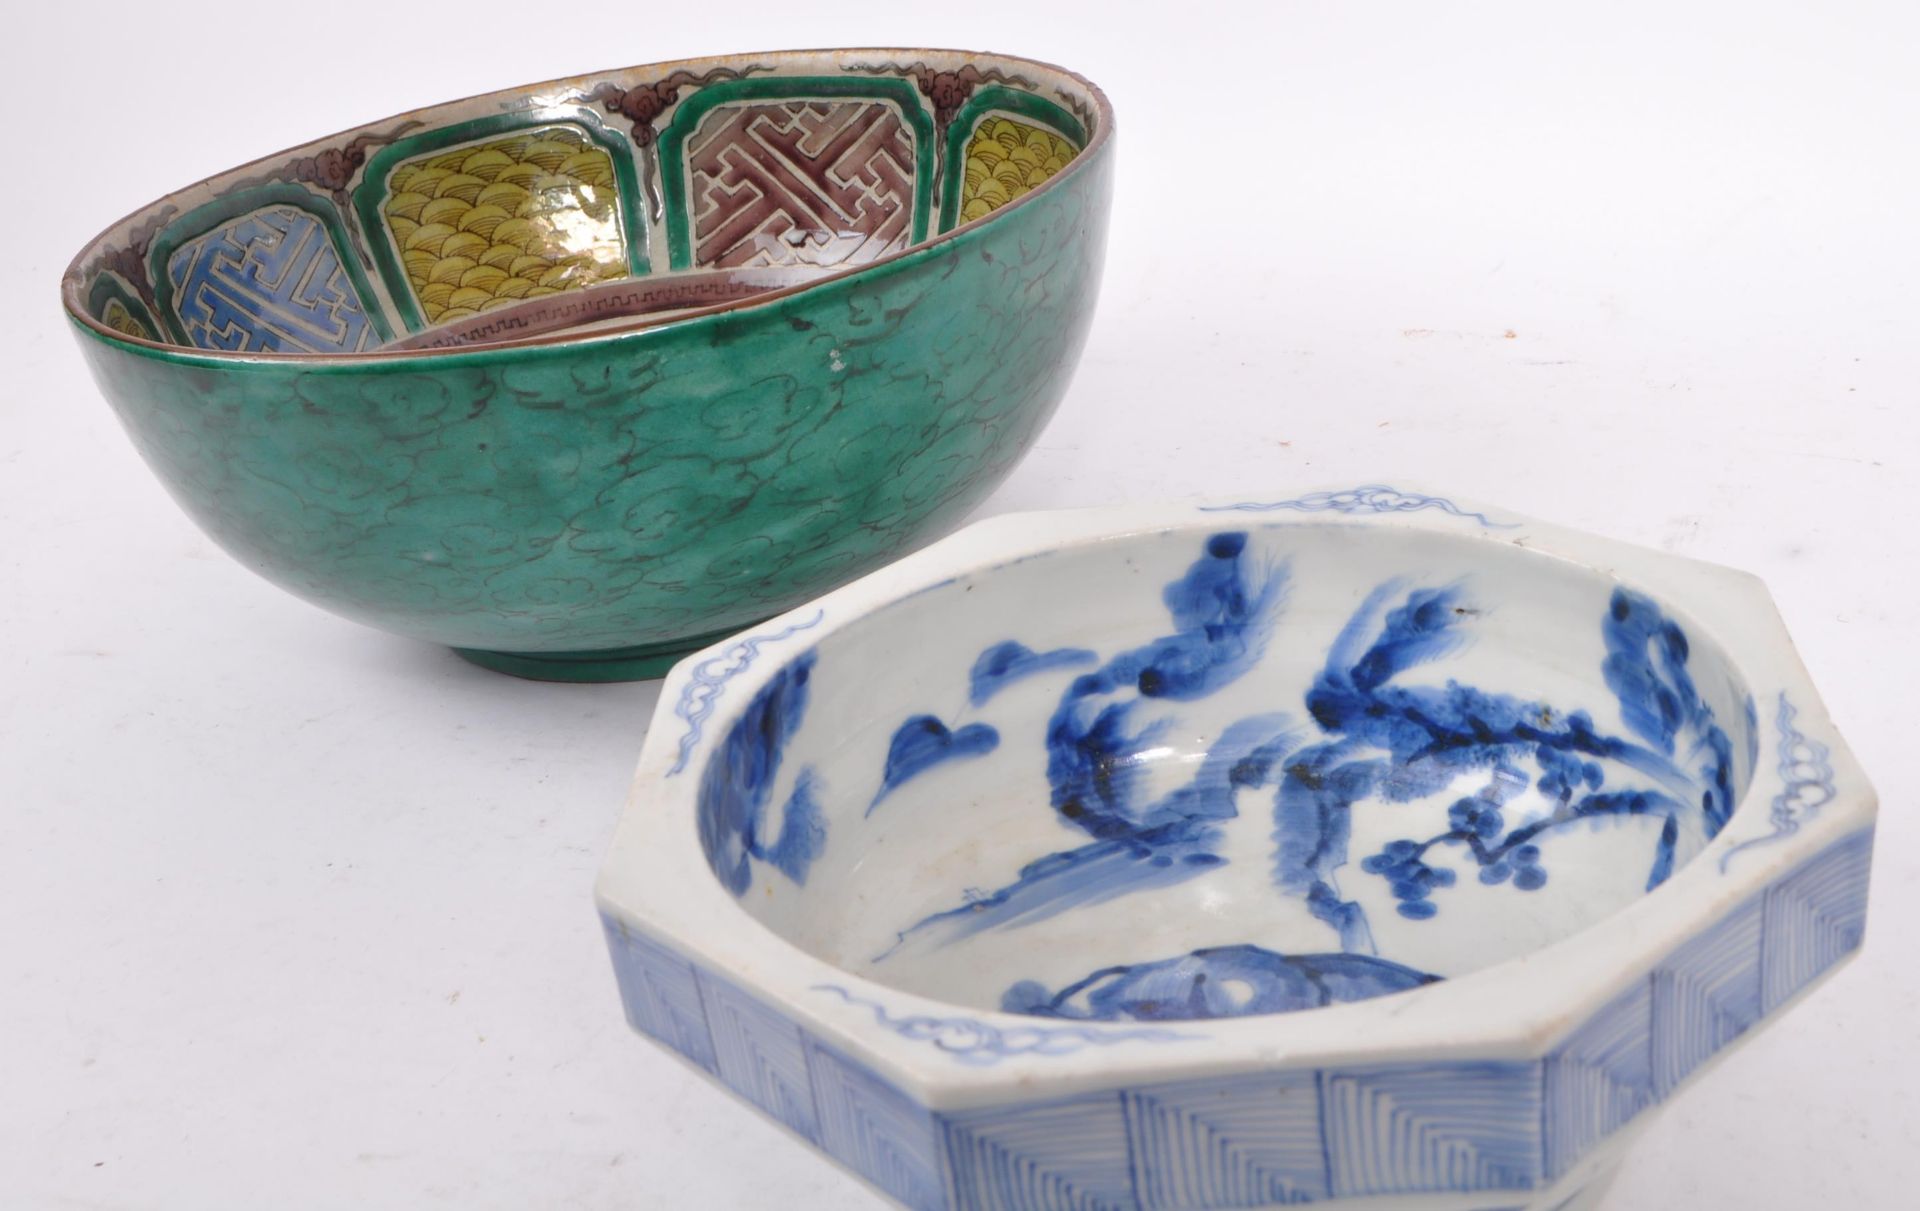 TWO MID 20TH CENTURY ASIAN CHINESE HAND PAINTED CERAMIC BOWLS - Image 4 of 5